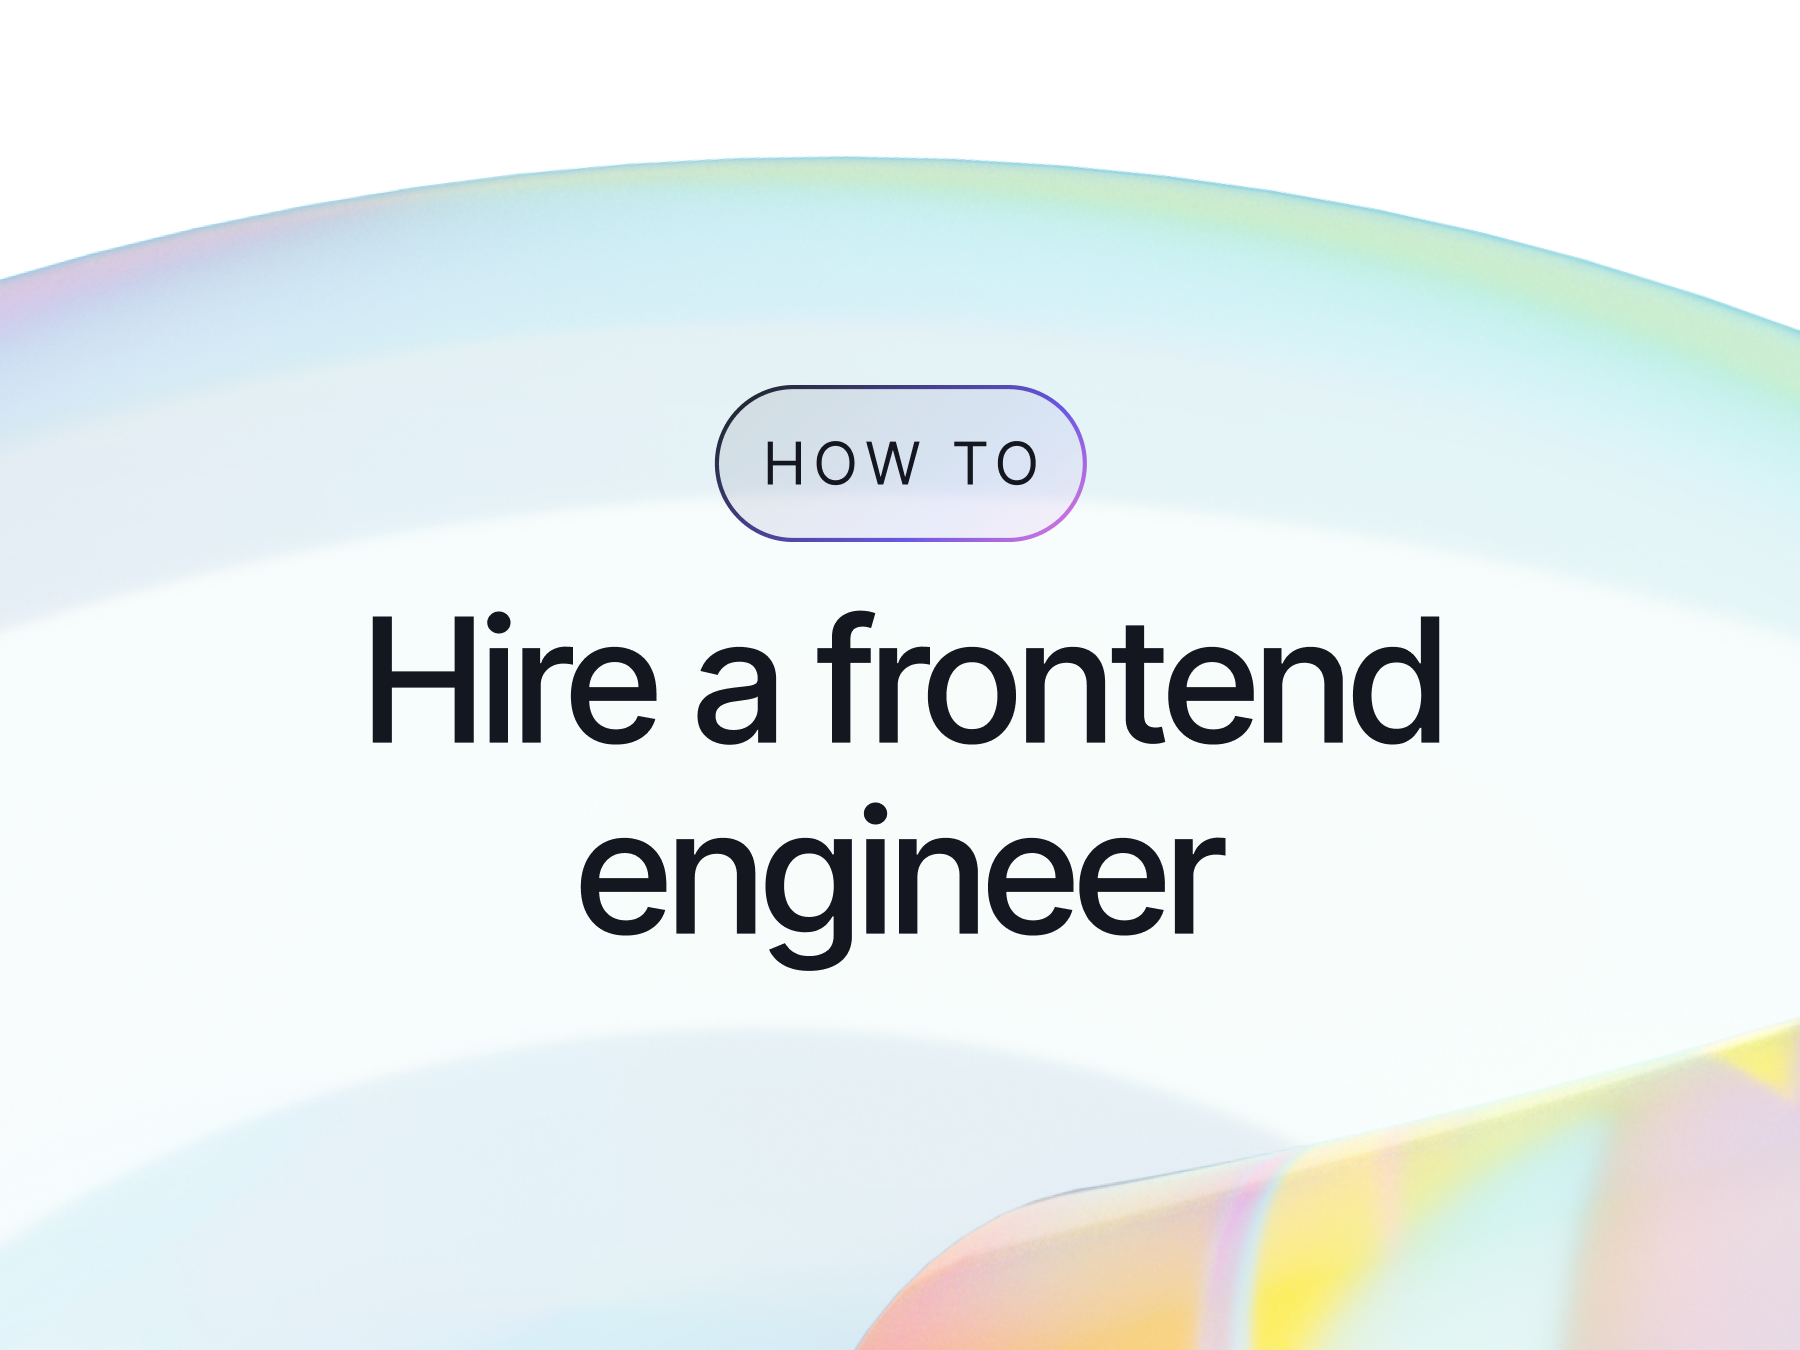 How to Hire a Frontend Engineer